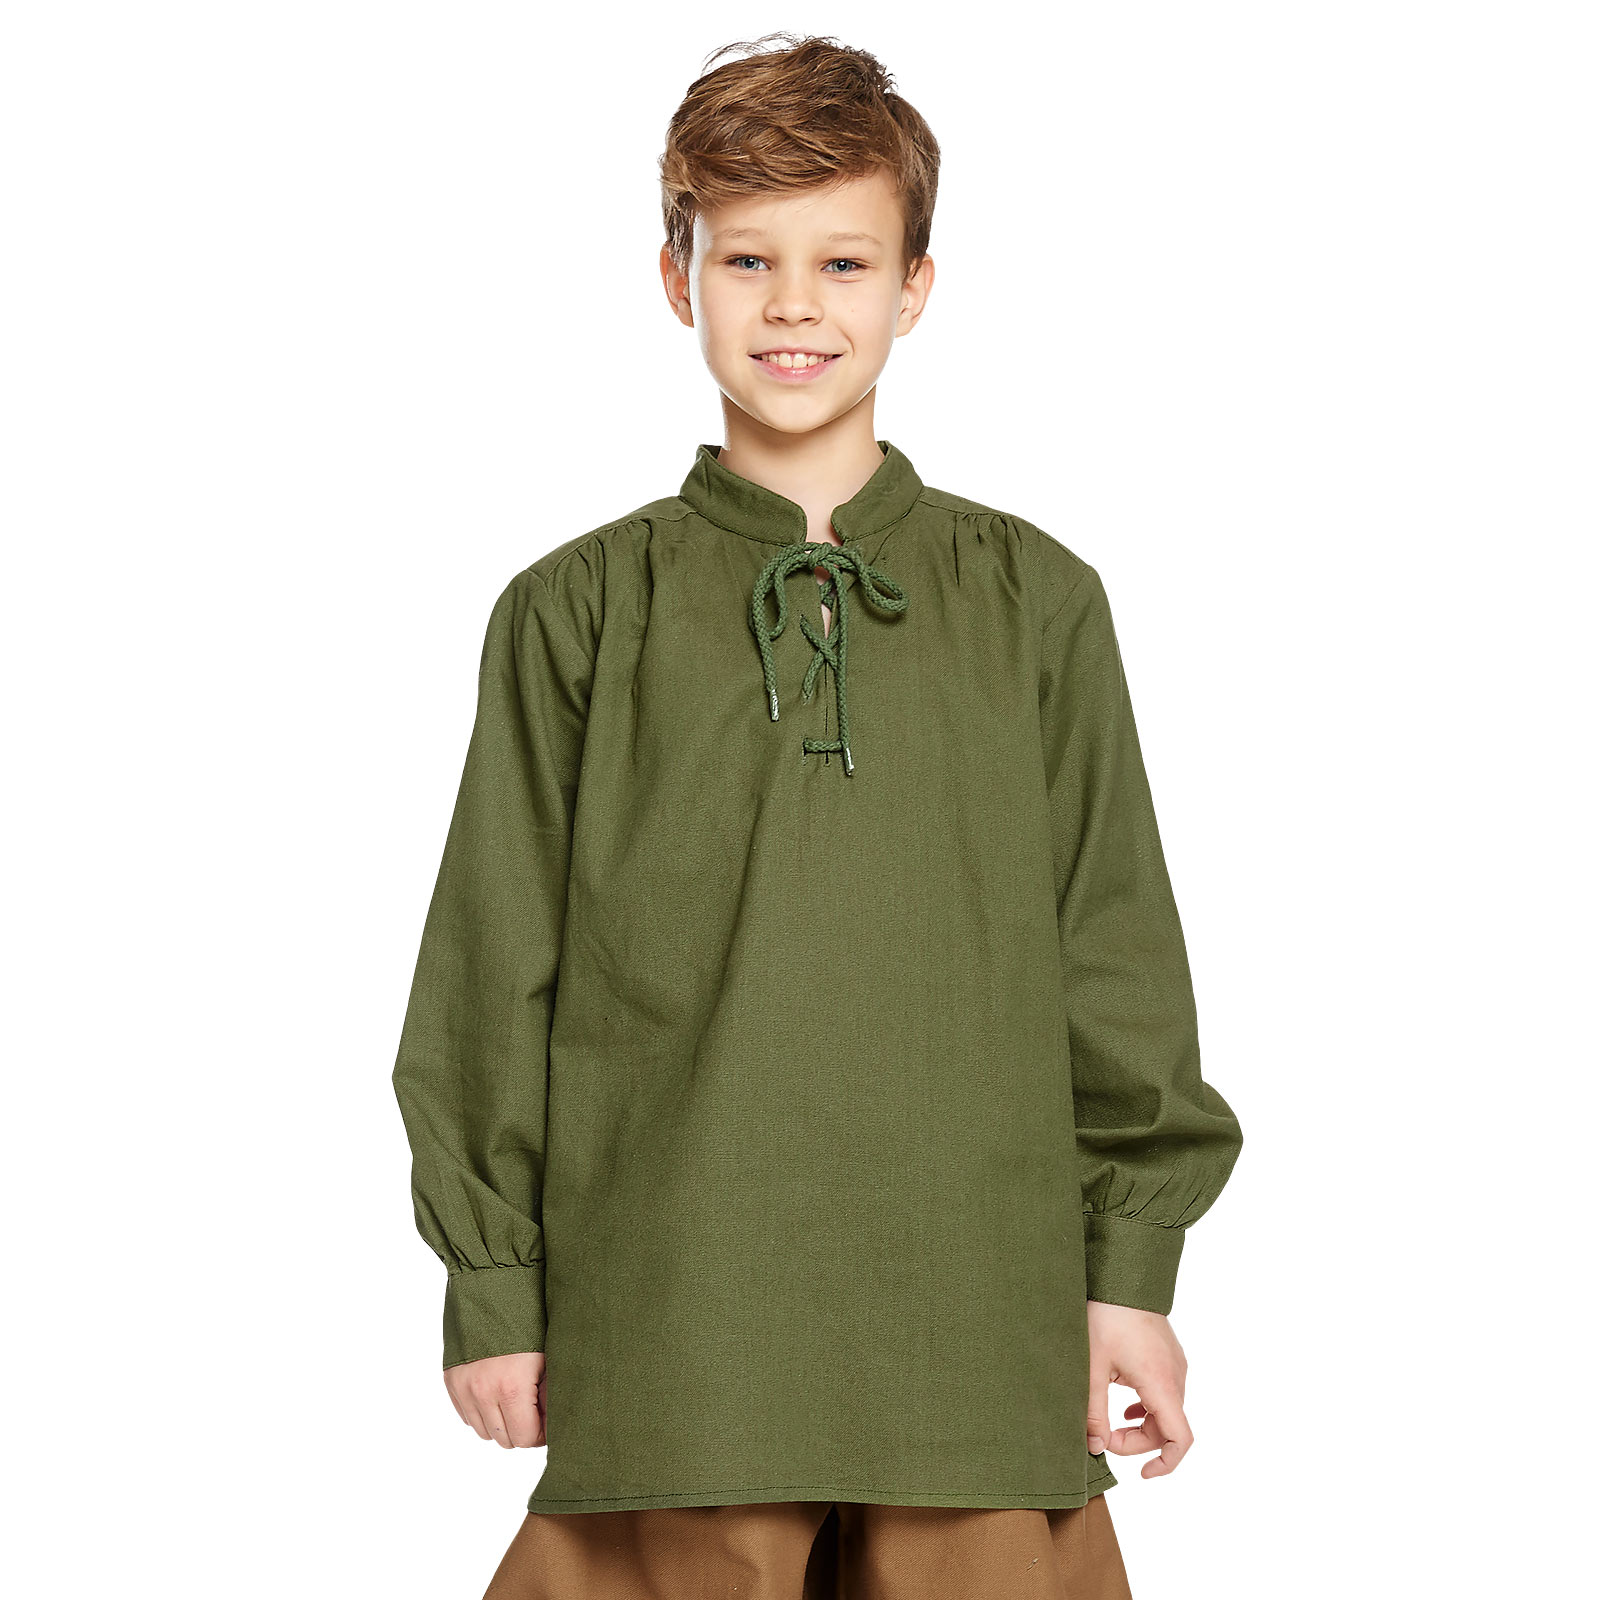 Medieval Shirt for Kids with Noble Back Lacing Green